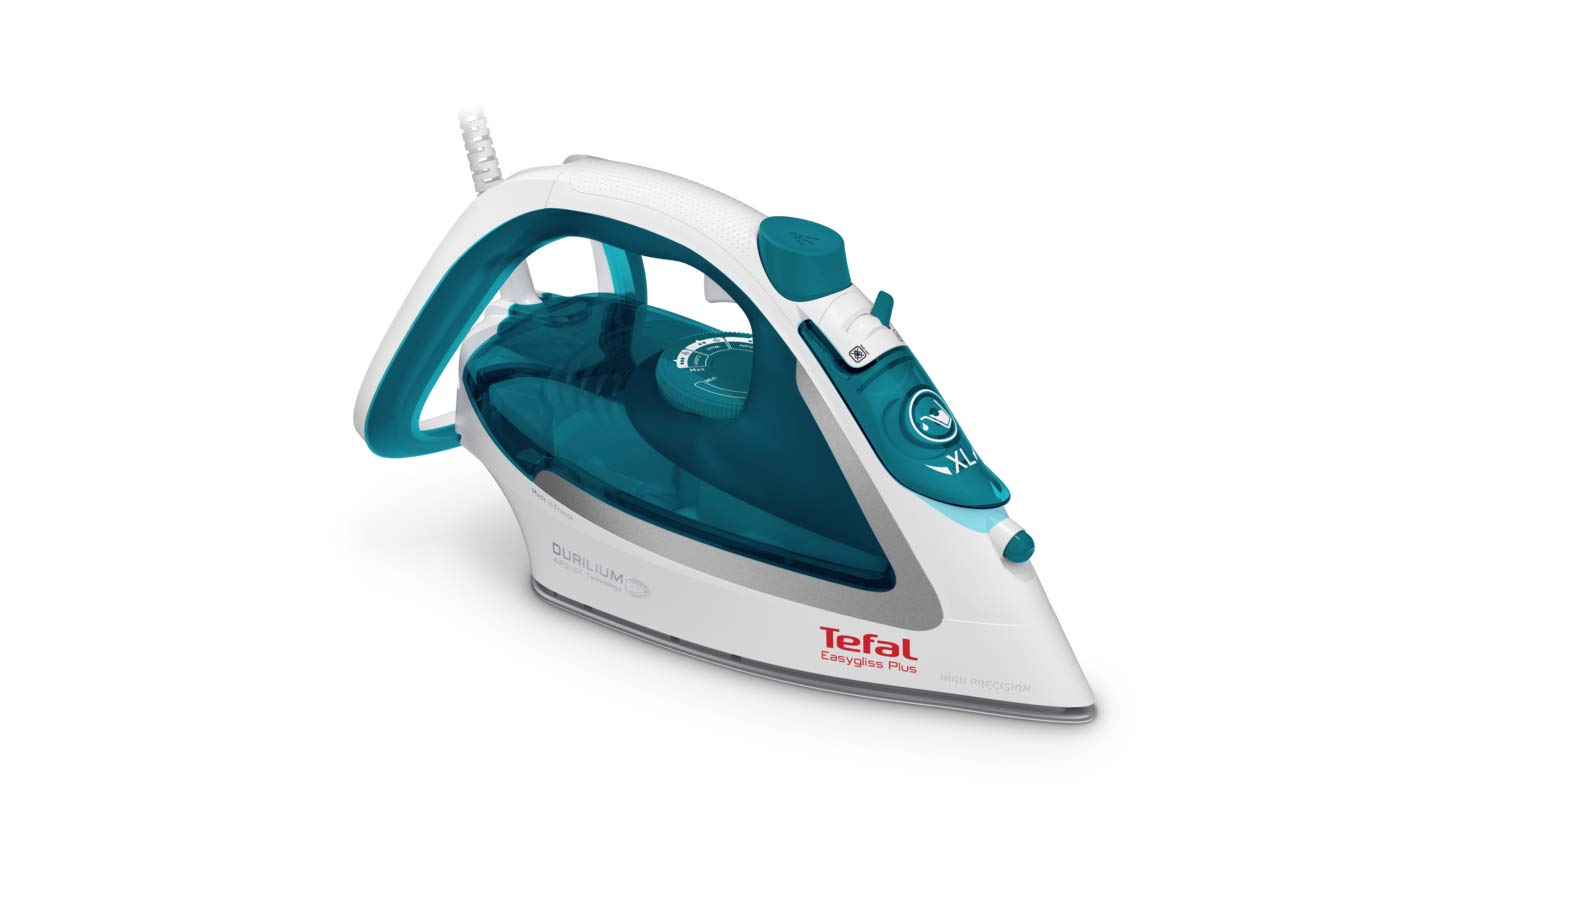 Tefal Easygliss Plus FV5718 Steam Iron Durilium Airglide Sole 2500 W Quick Heating Drip Stop Anti-limescale System Vertical Steam